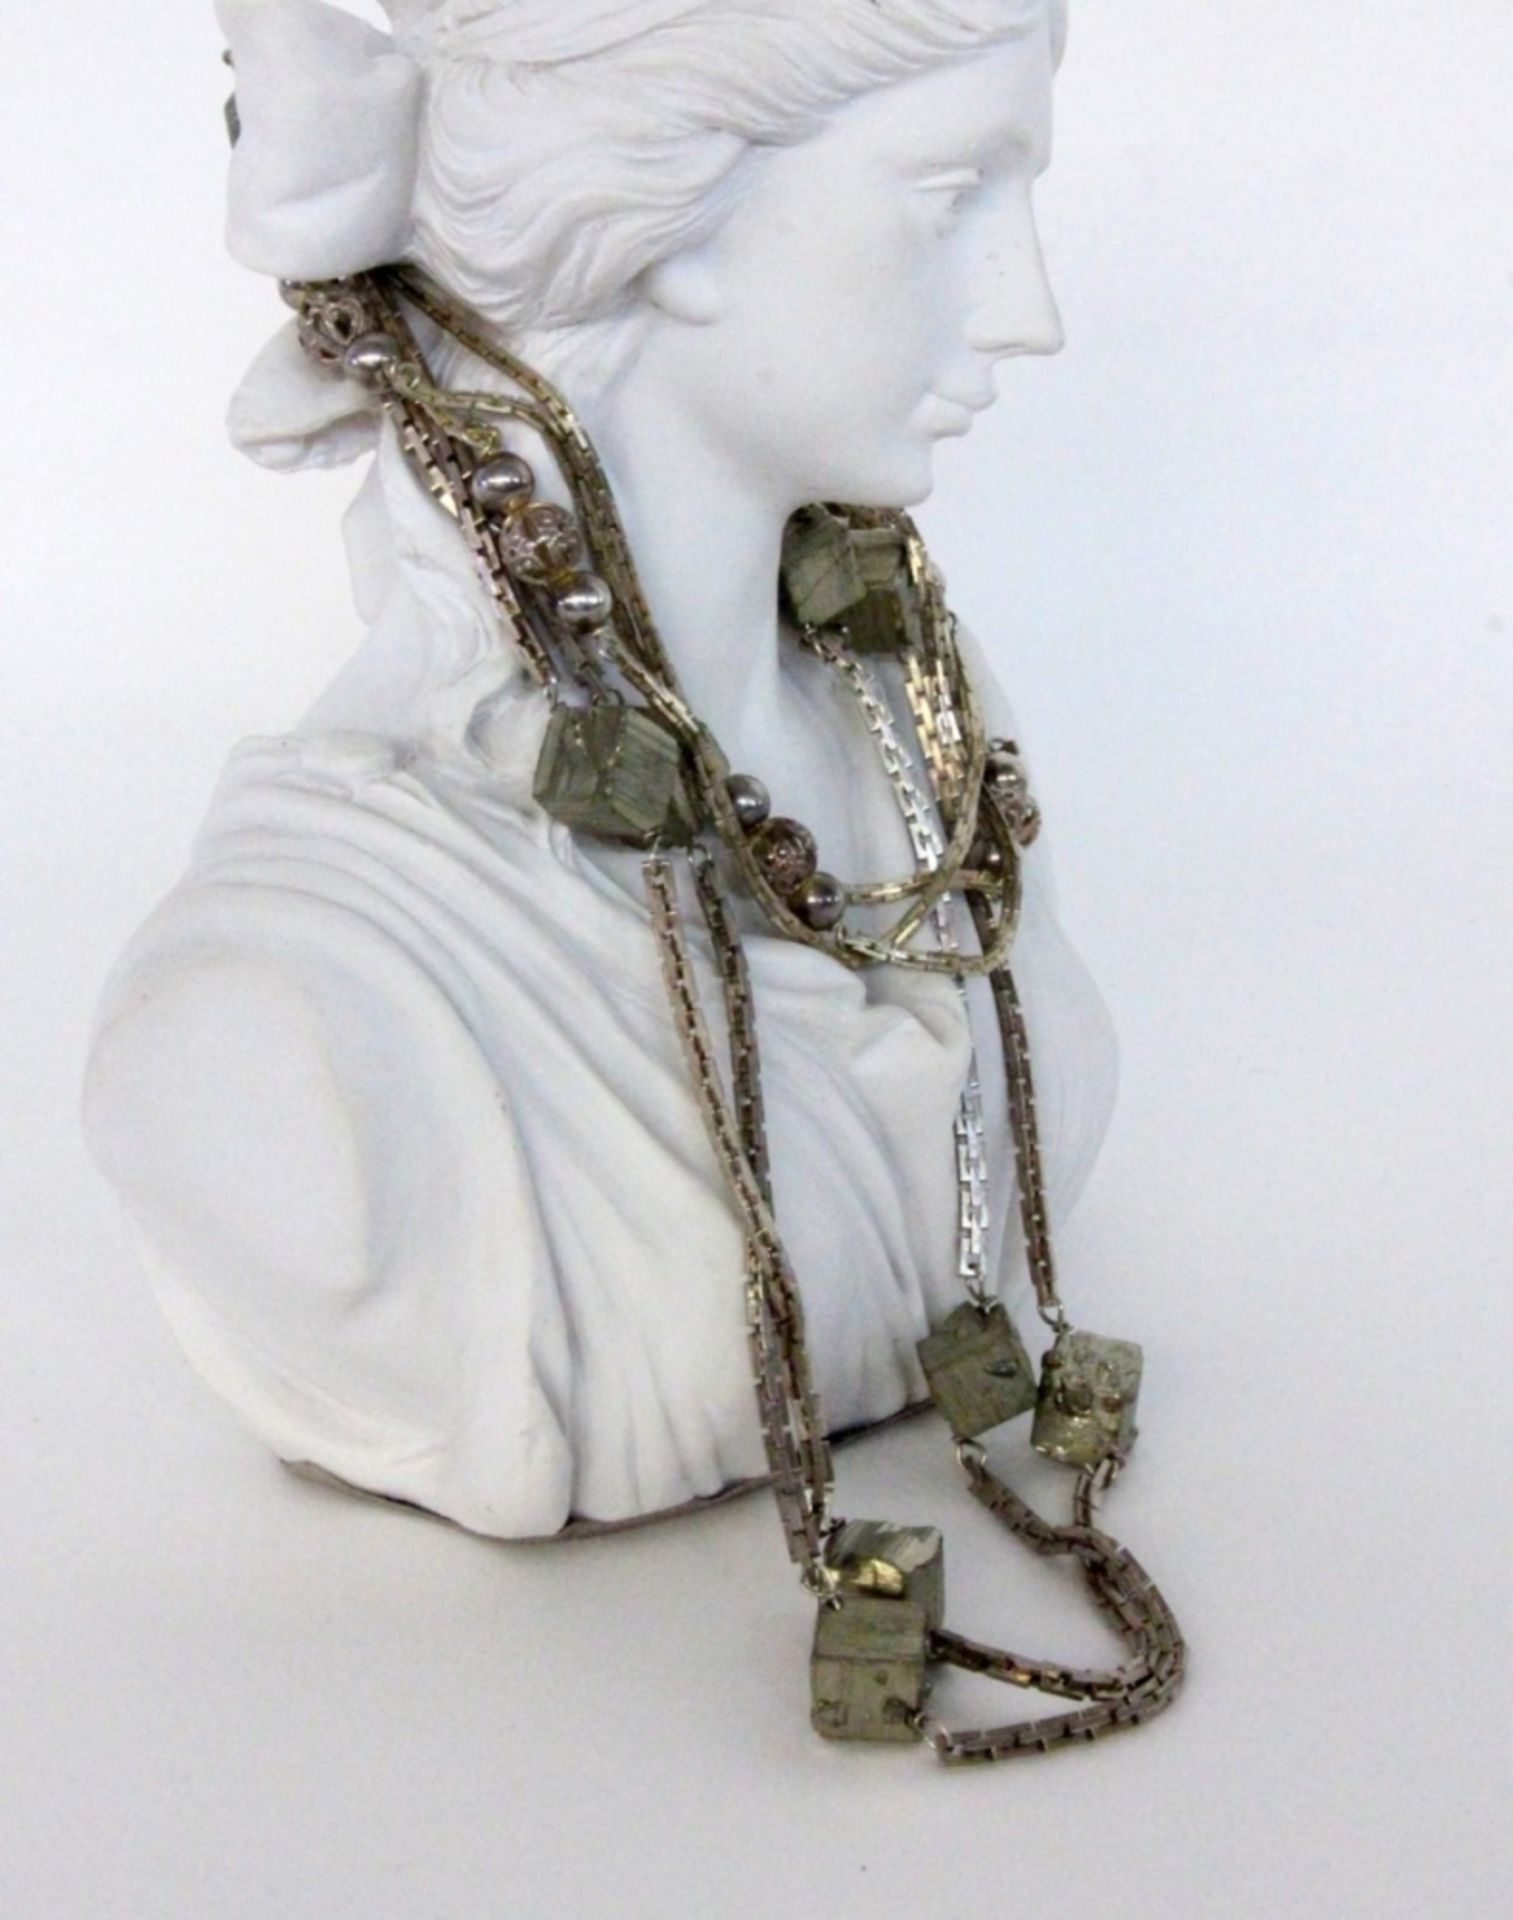 2 SILBERNE HALSKETTENmit Pyrit. L. je ca. 86cm2 SILVER NECKLACES with pyrite. Each approximat